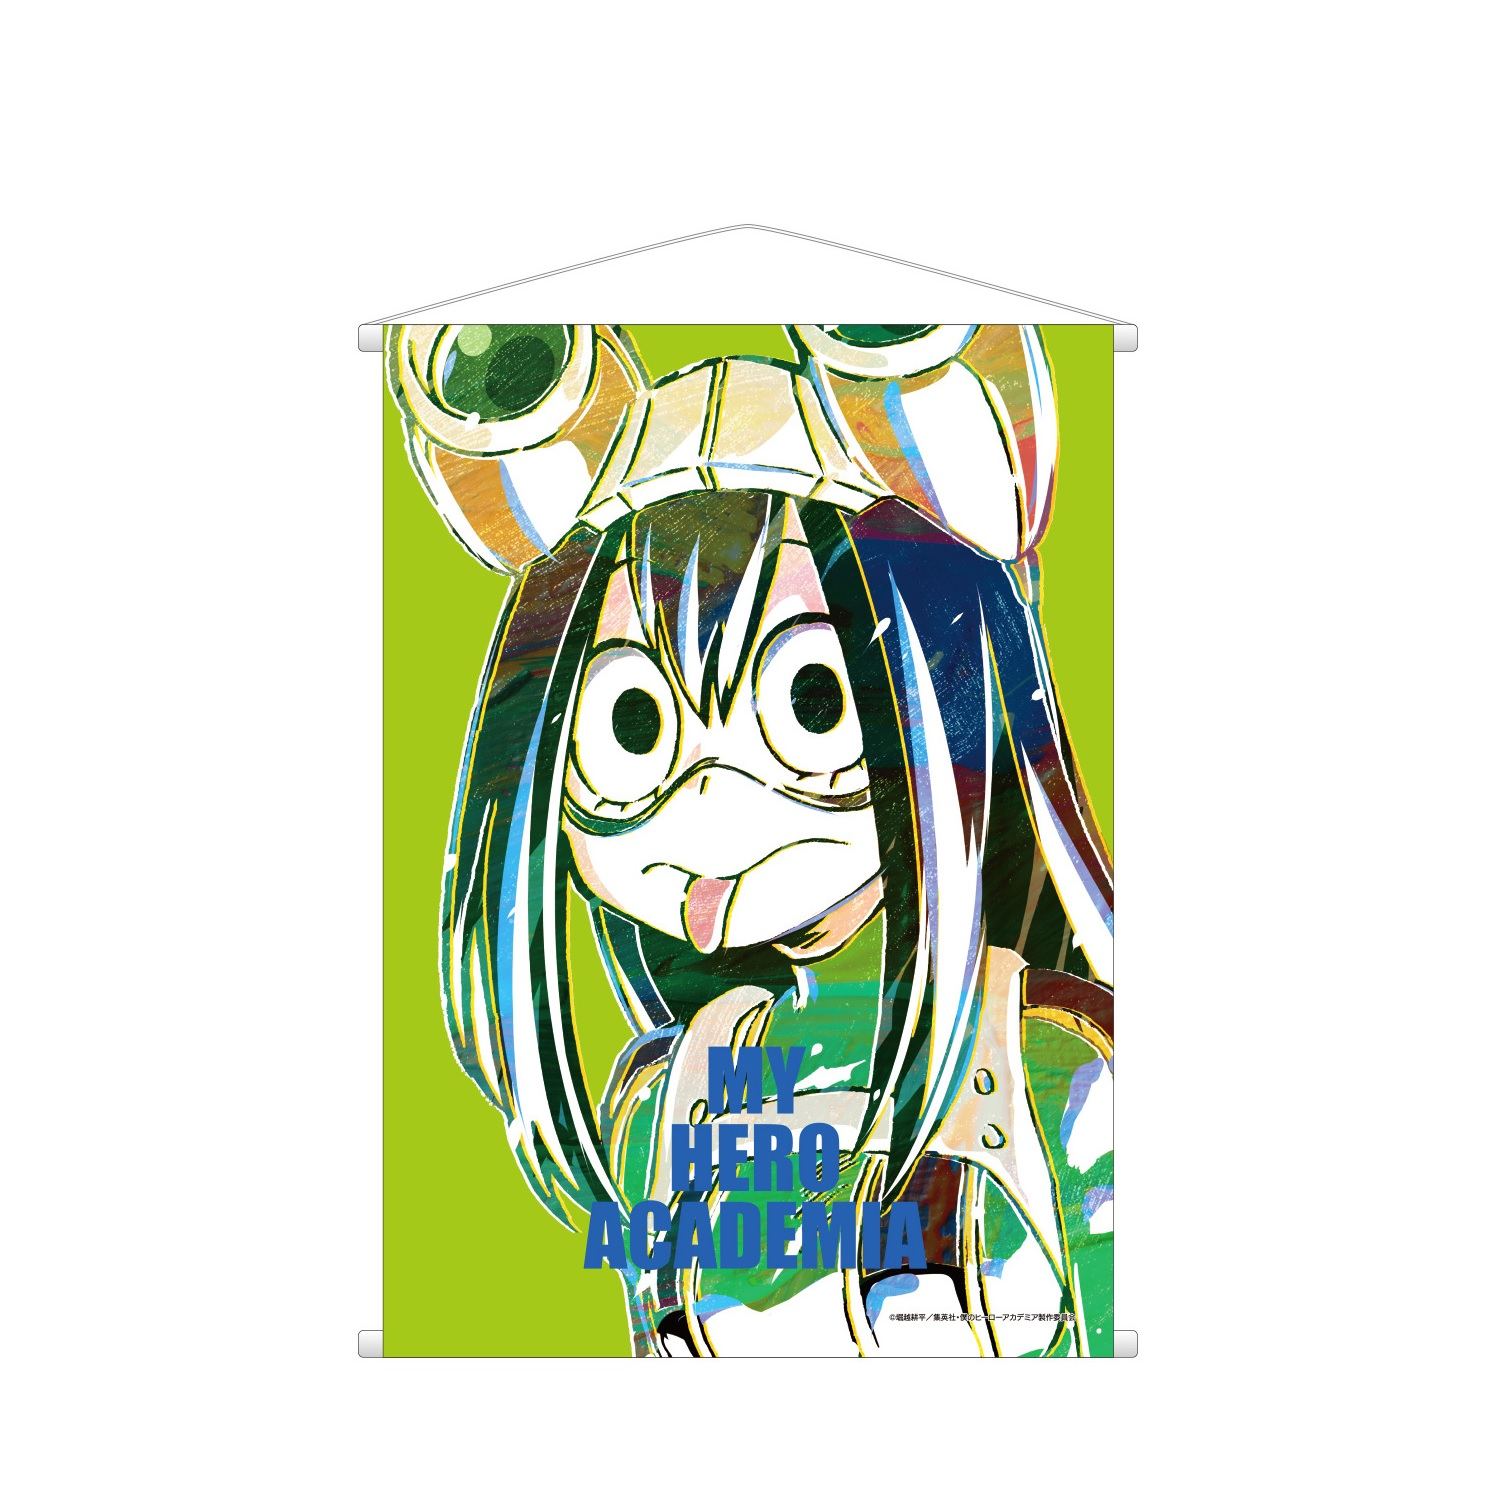 my favorite anime character is tsuyu asui from Mha Rose_gold -  Illustrations ART street